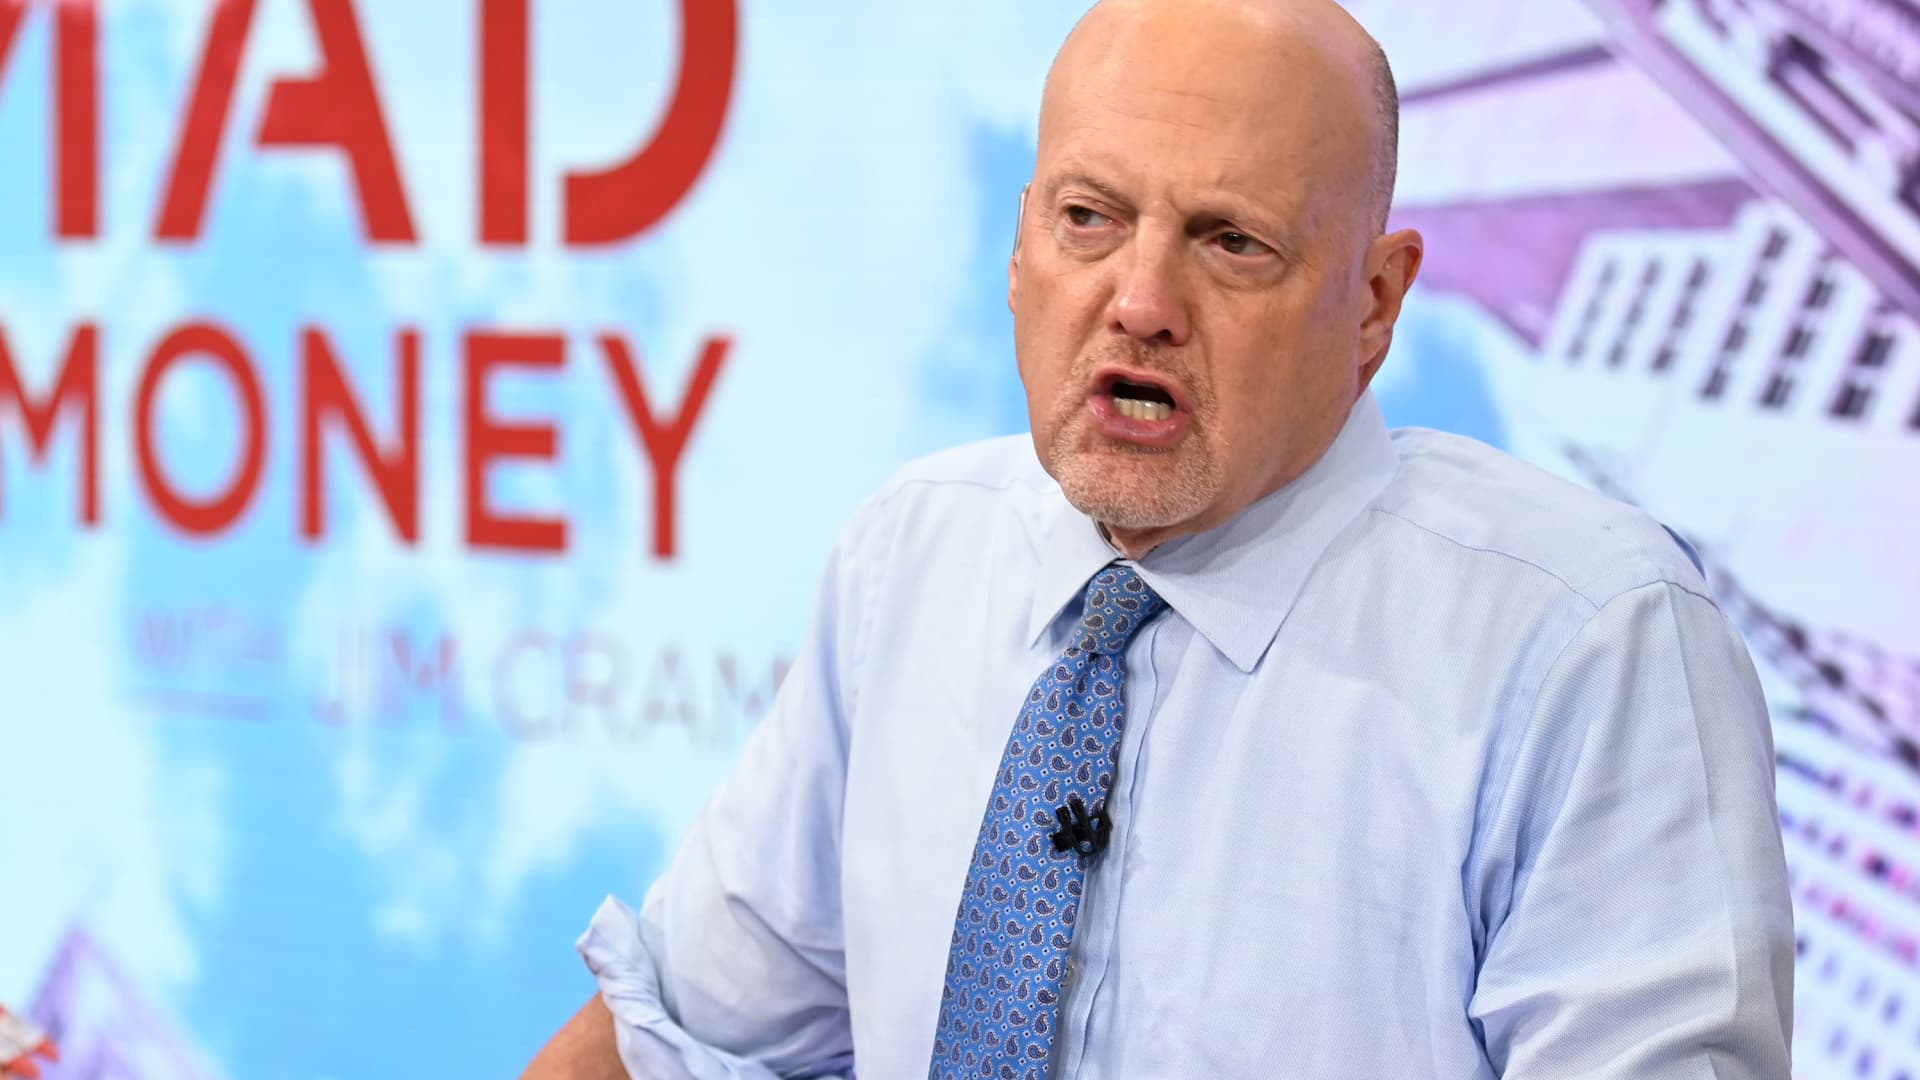 A series of outperforming stocks comprise bucked macro traits, Jim Cramer says